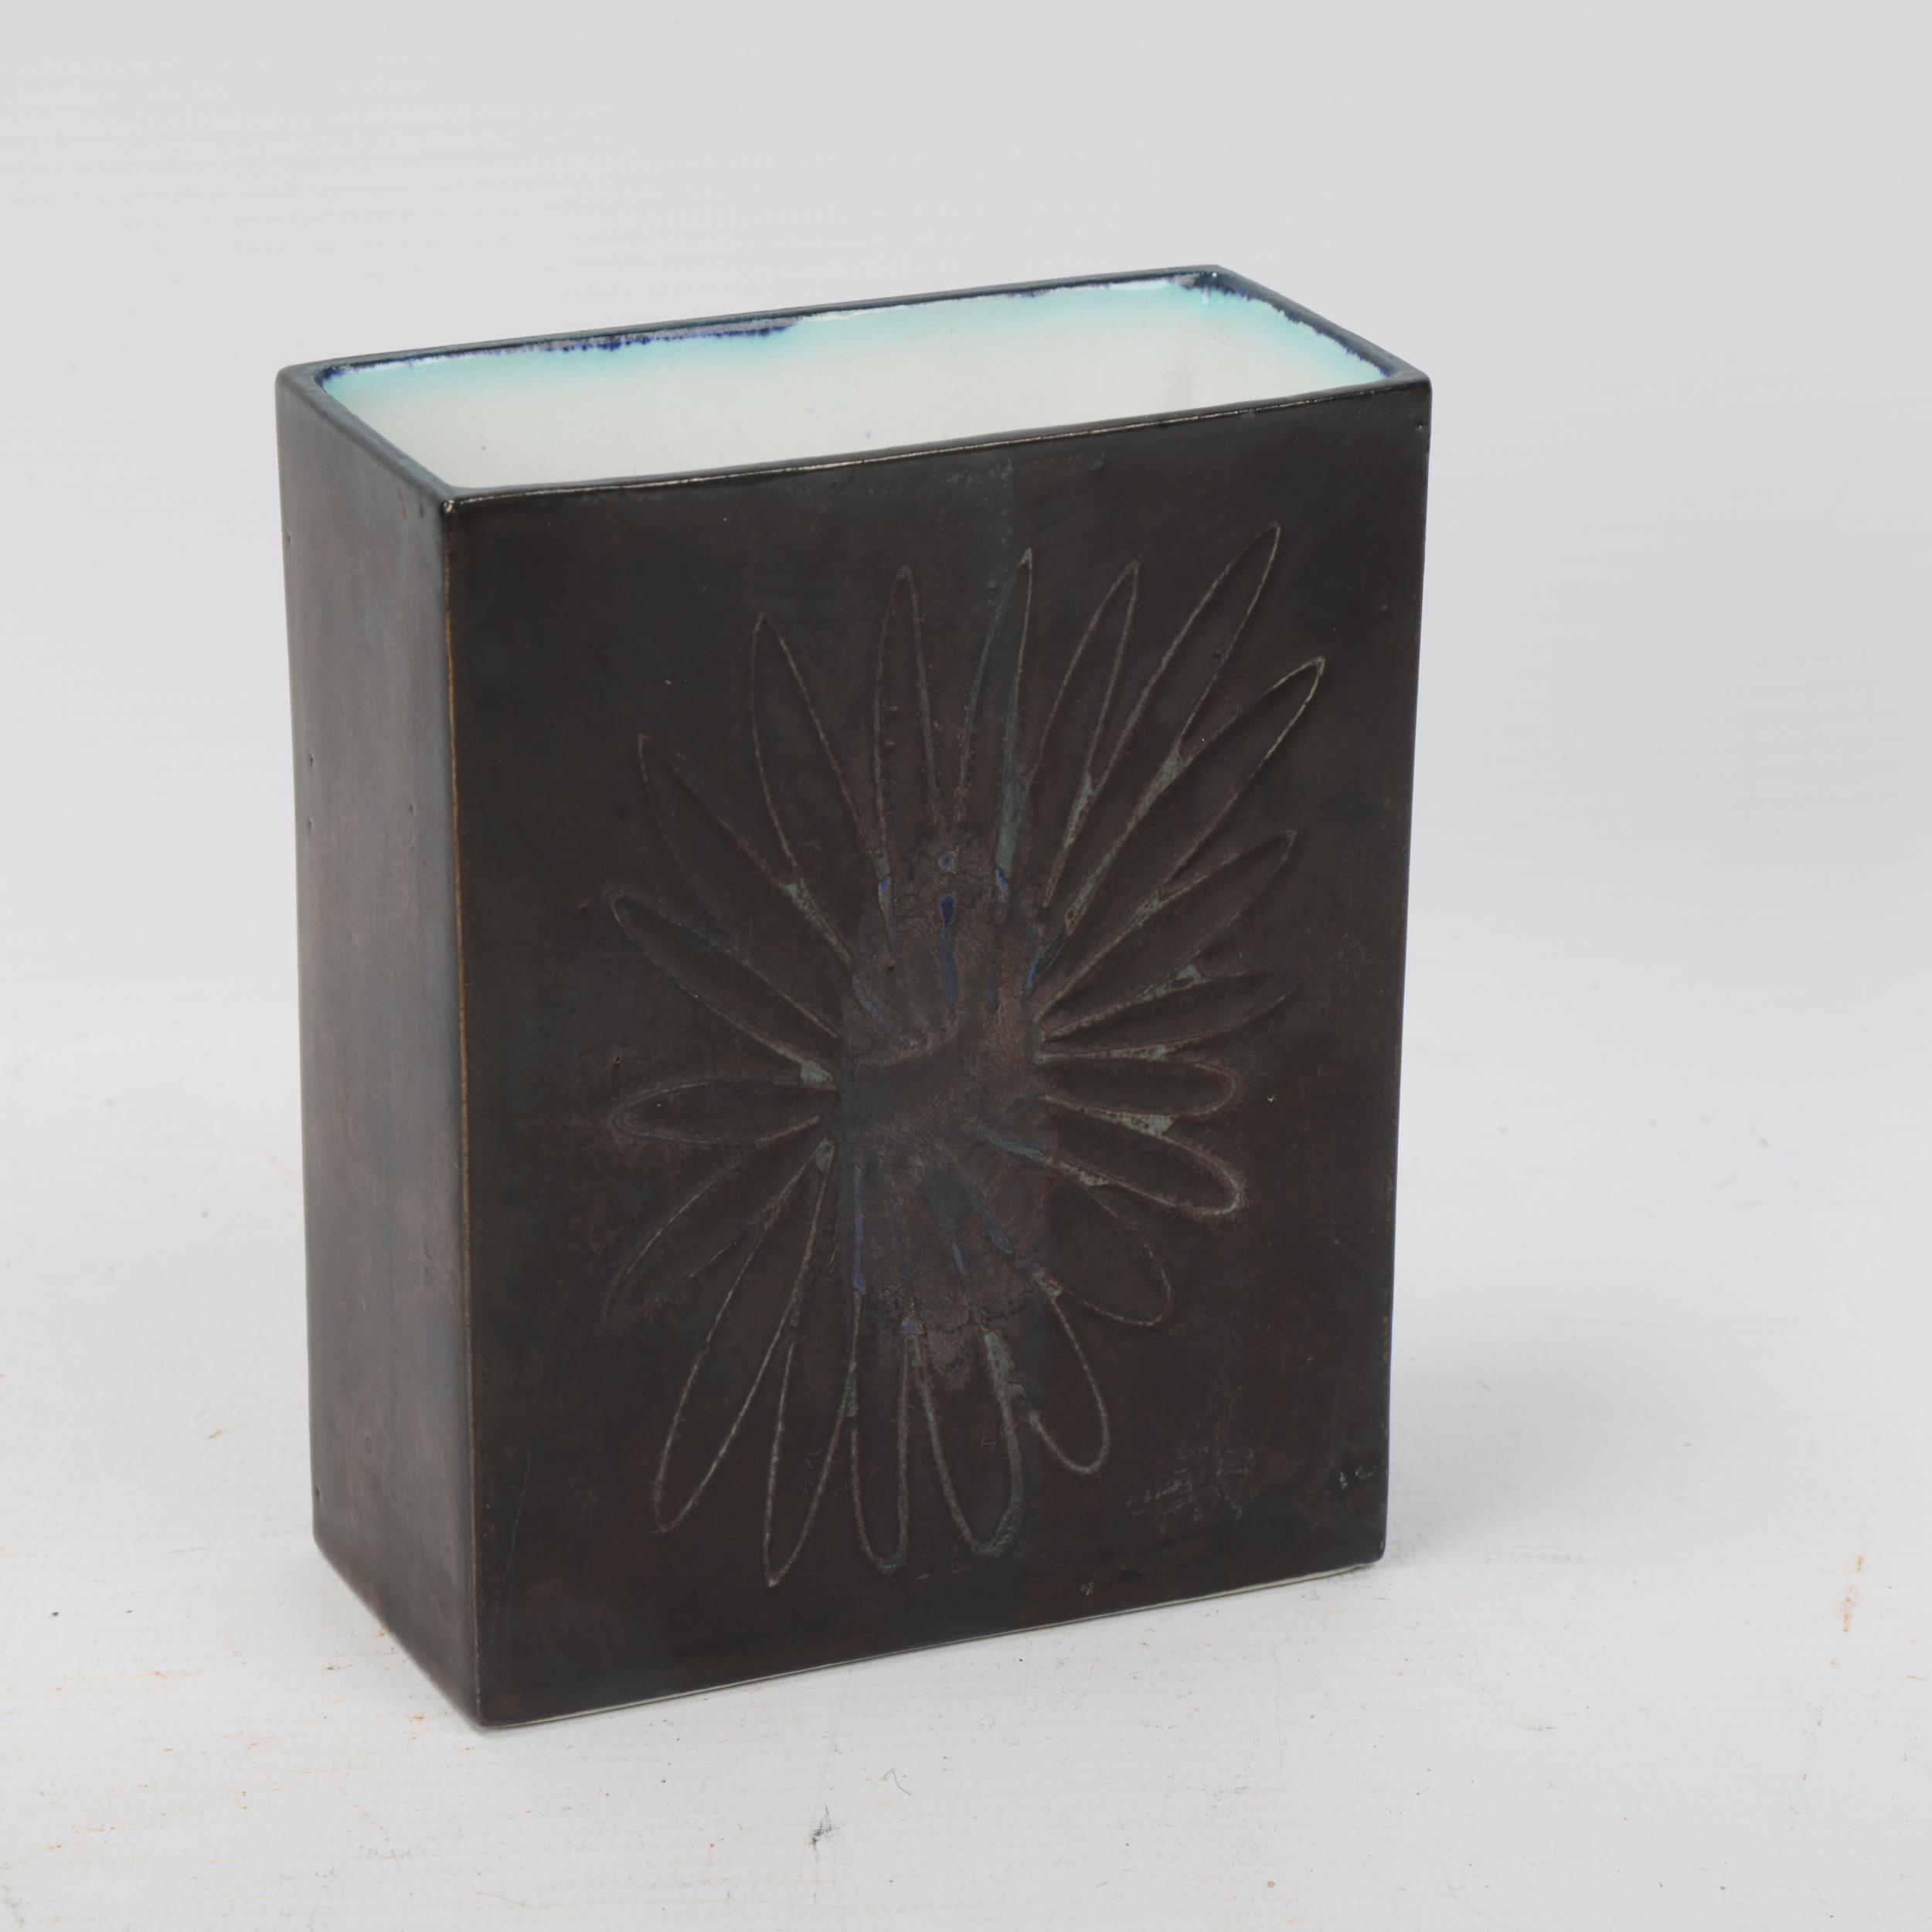 Troika, St Ives, an 1960's early slab vase, with manganese oxide glaze decorated with a wax resist - Image 2 of 3